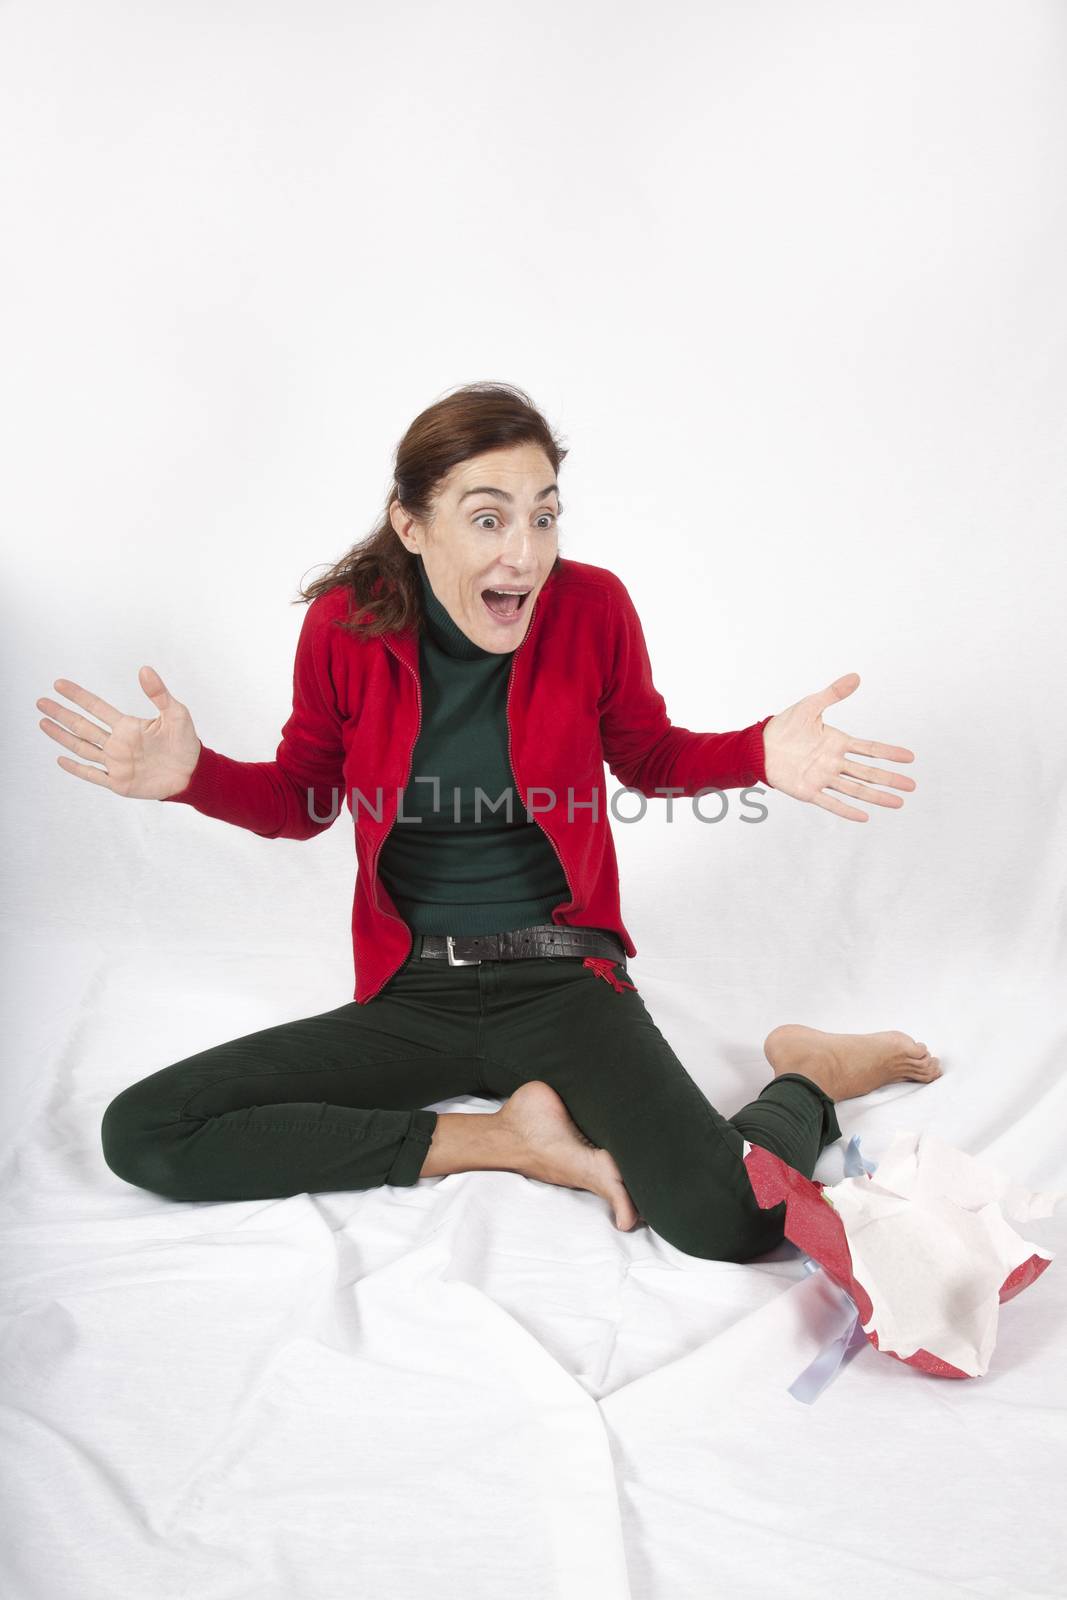 brunette caucasian woman red cardigan green trousers barefoot surprised looking open arms sitting on white background